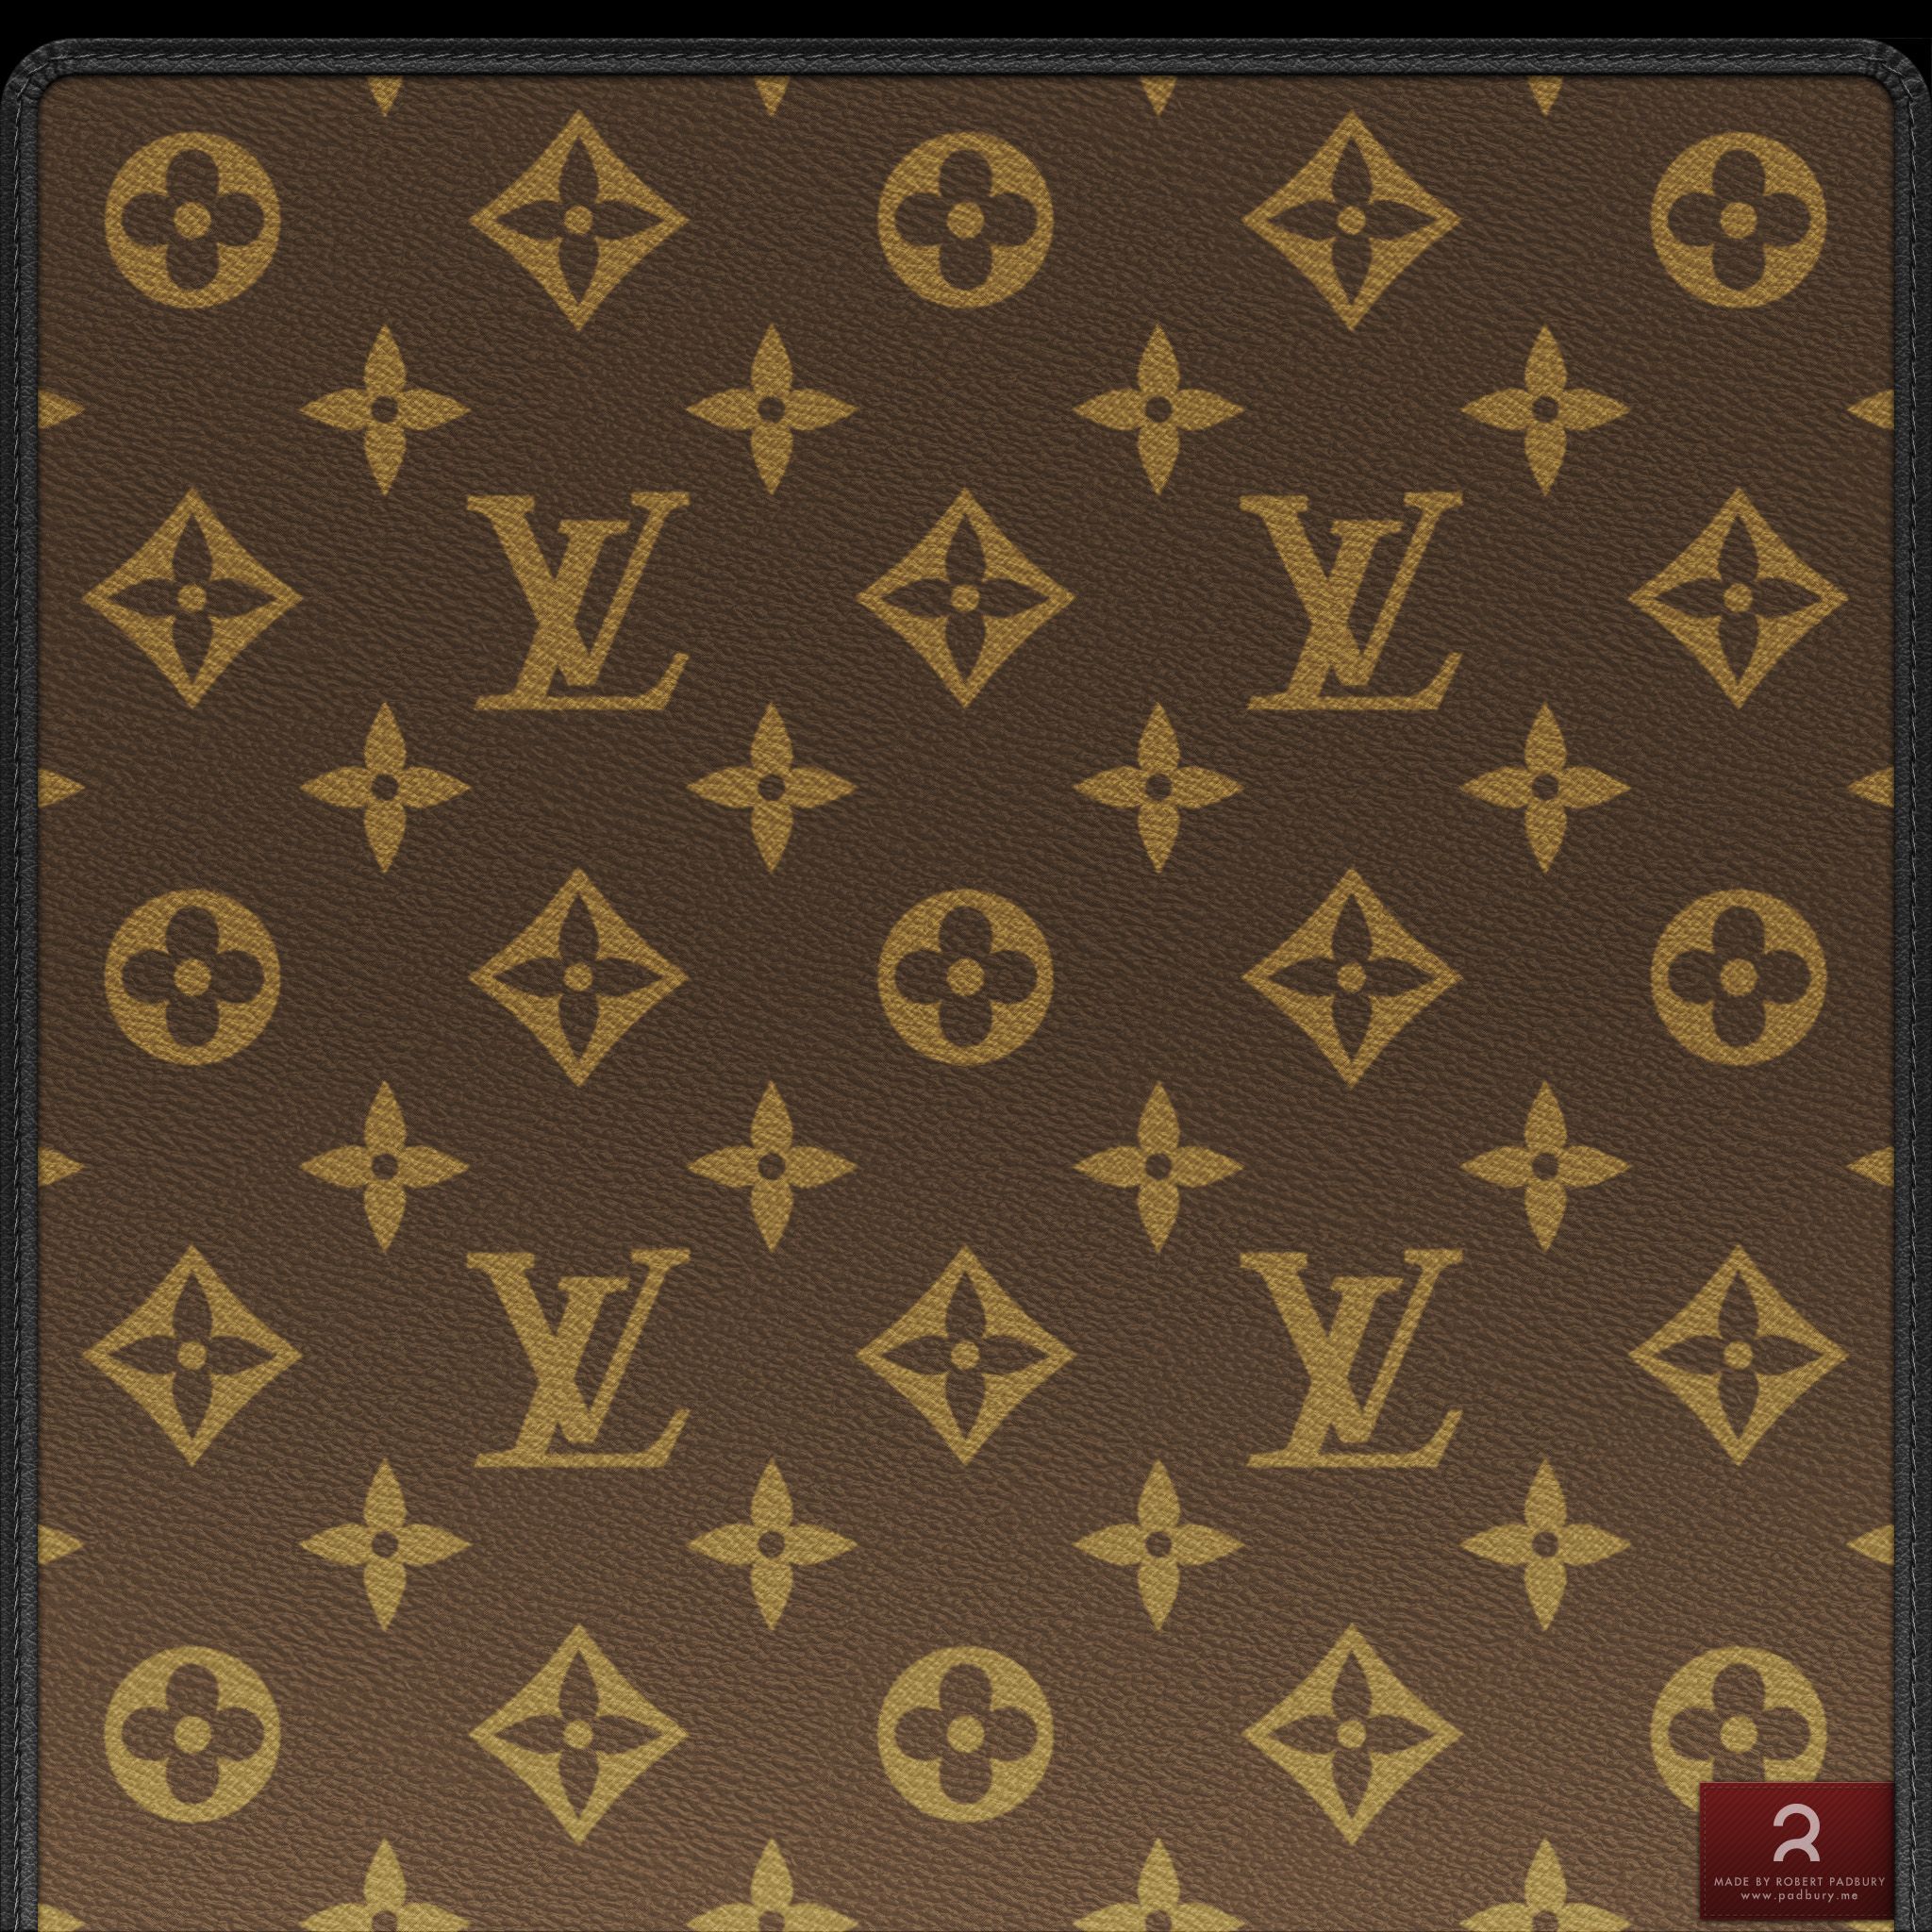 Louis Vuitton Free Printable Papers.  Louis vuitton iphone wallpaper, Louis  vuitton pattern, Louis vuitton background